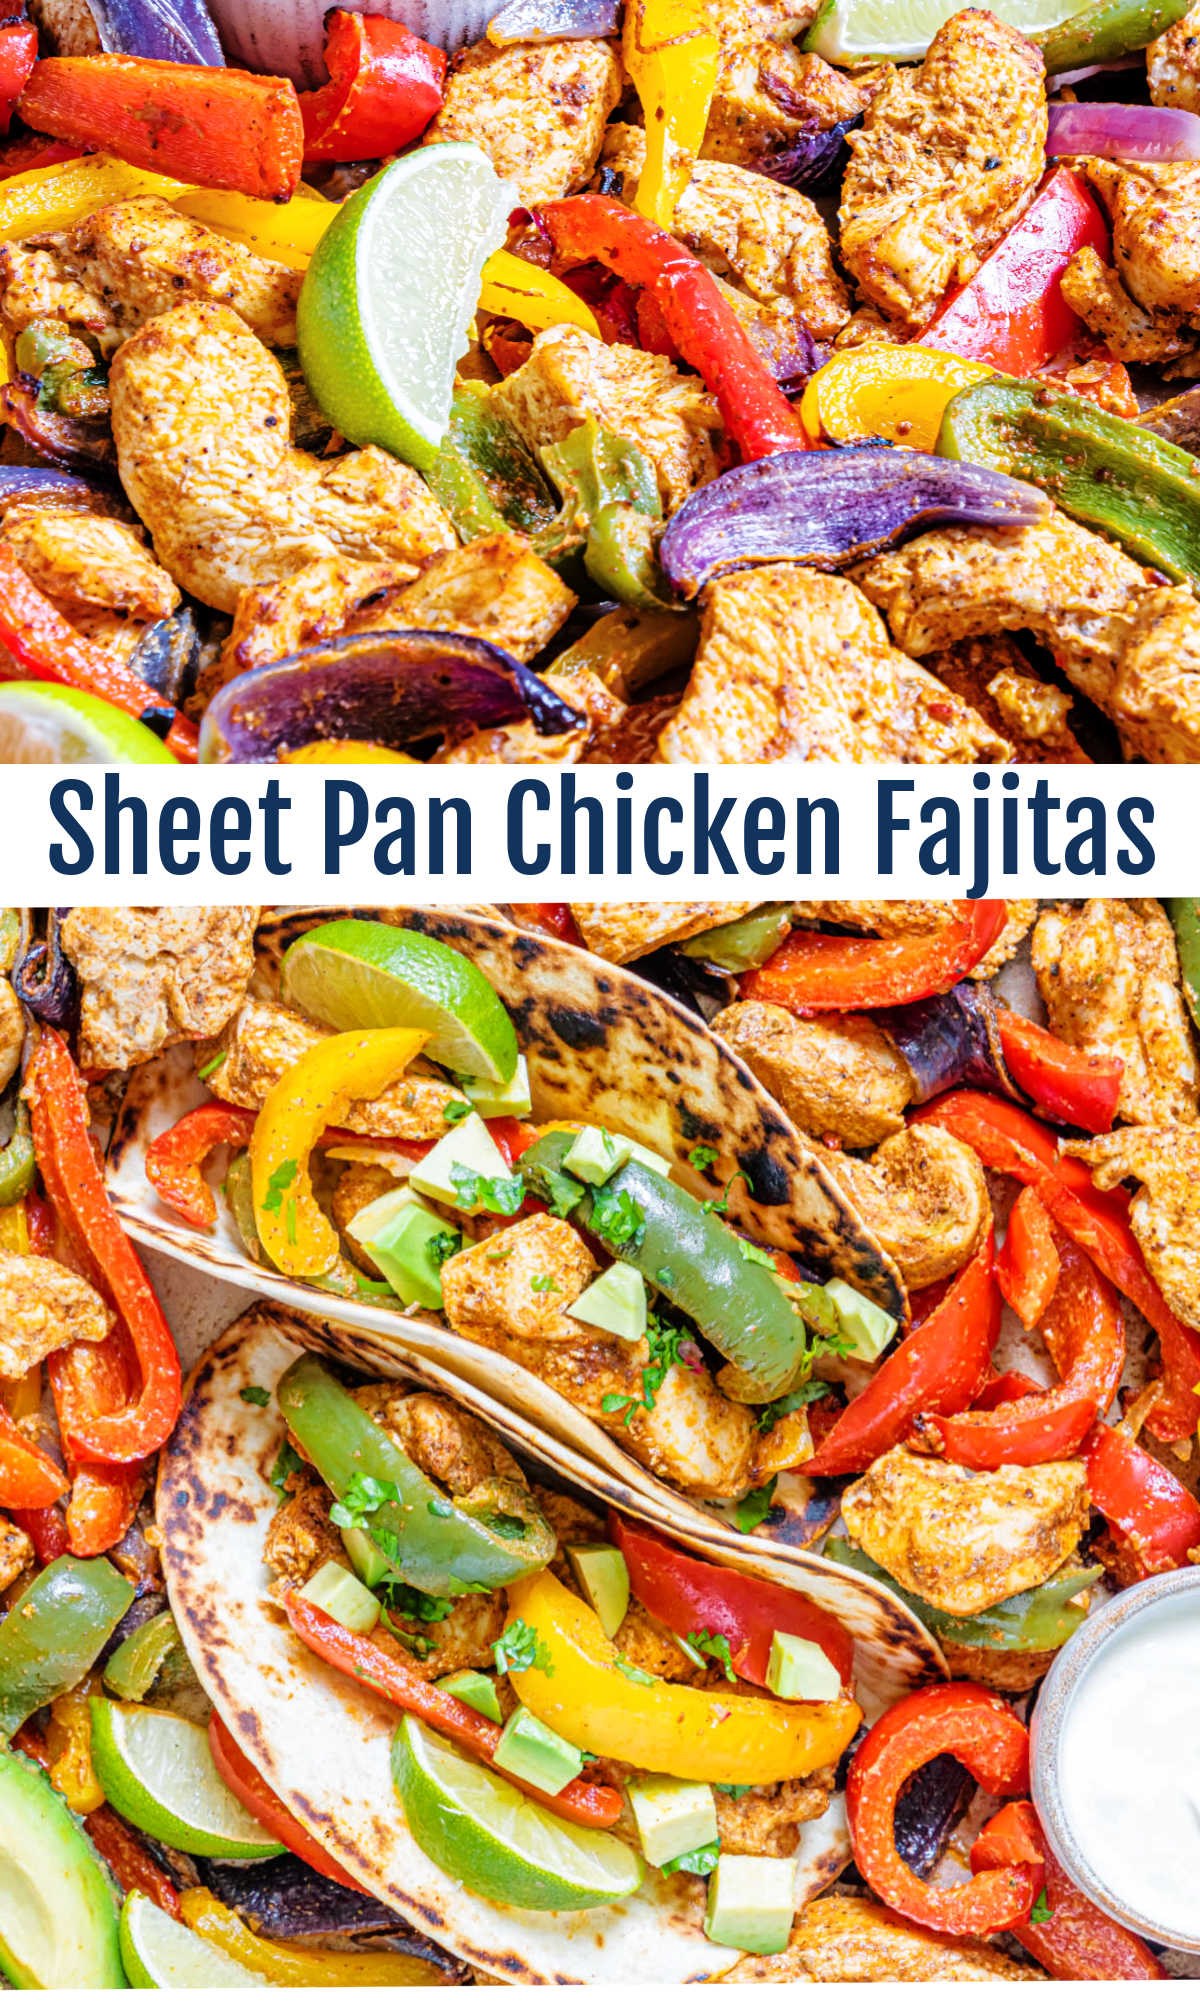 Sheet pan chicken fajitas are a fabulous and fast way to get dinner on the table. Have some tortillas, sour cream, limes and avocados on hand for a superb supper.